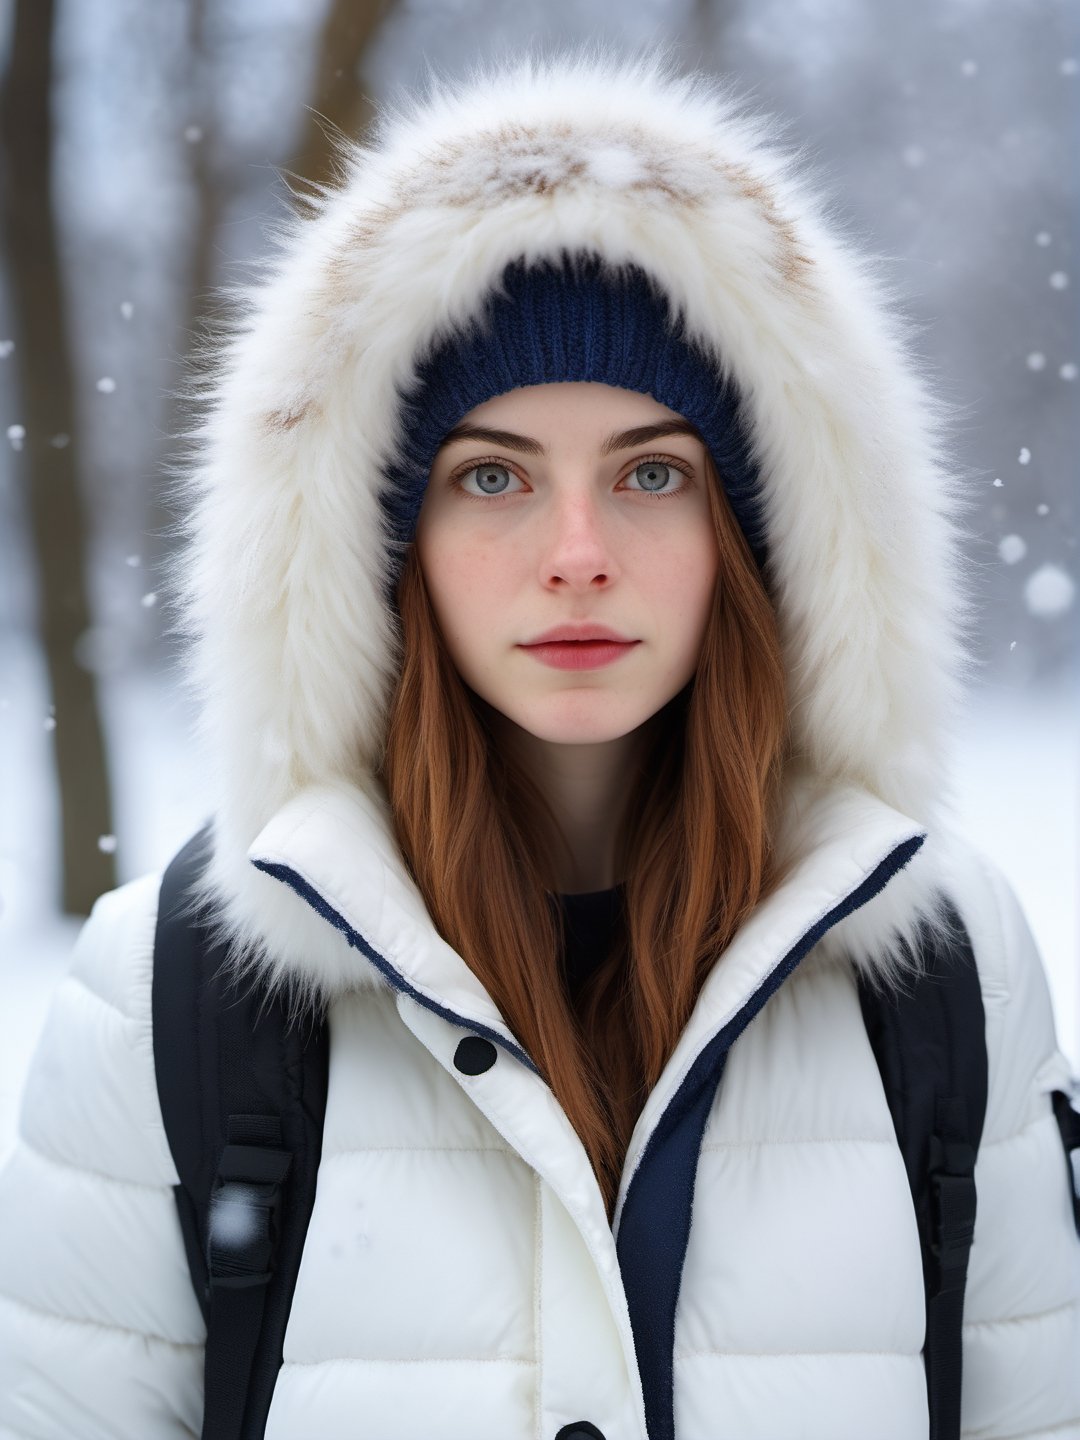 photo r3al, detailmaster2, masterpiece, photorealistic, 8k, 8k UHD, best quality, ultra realistic, ultra detailed, hyperdetailed photography, real photo, realistic eyes, solo female, snowing, winter, white winter fur jacket, hood, photorealistic, real photo, 8k, realistic eyes, detailed face, upper body, facing viewer, pale skin, daylight, outdoors, 30 years old, cute, looking towards the sky, 